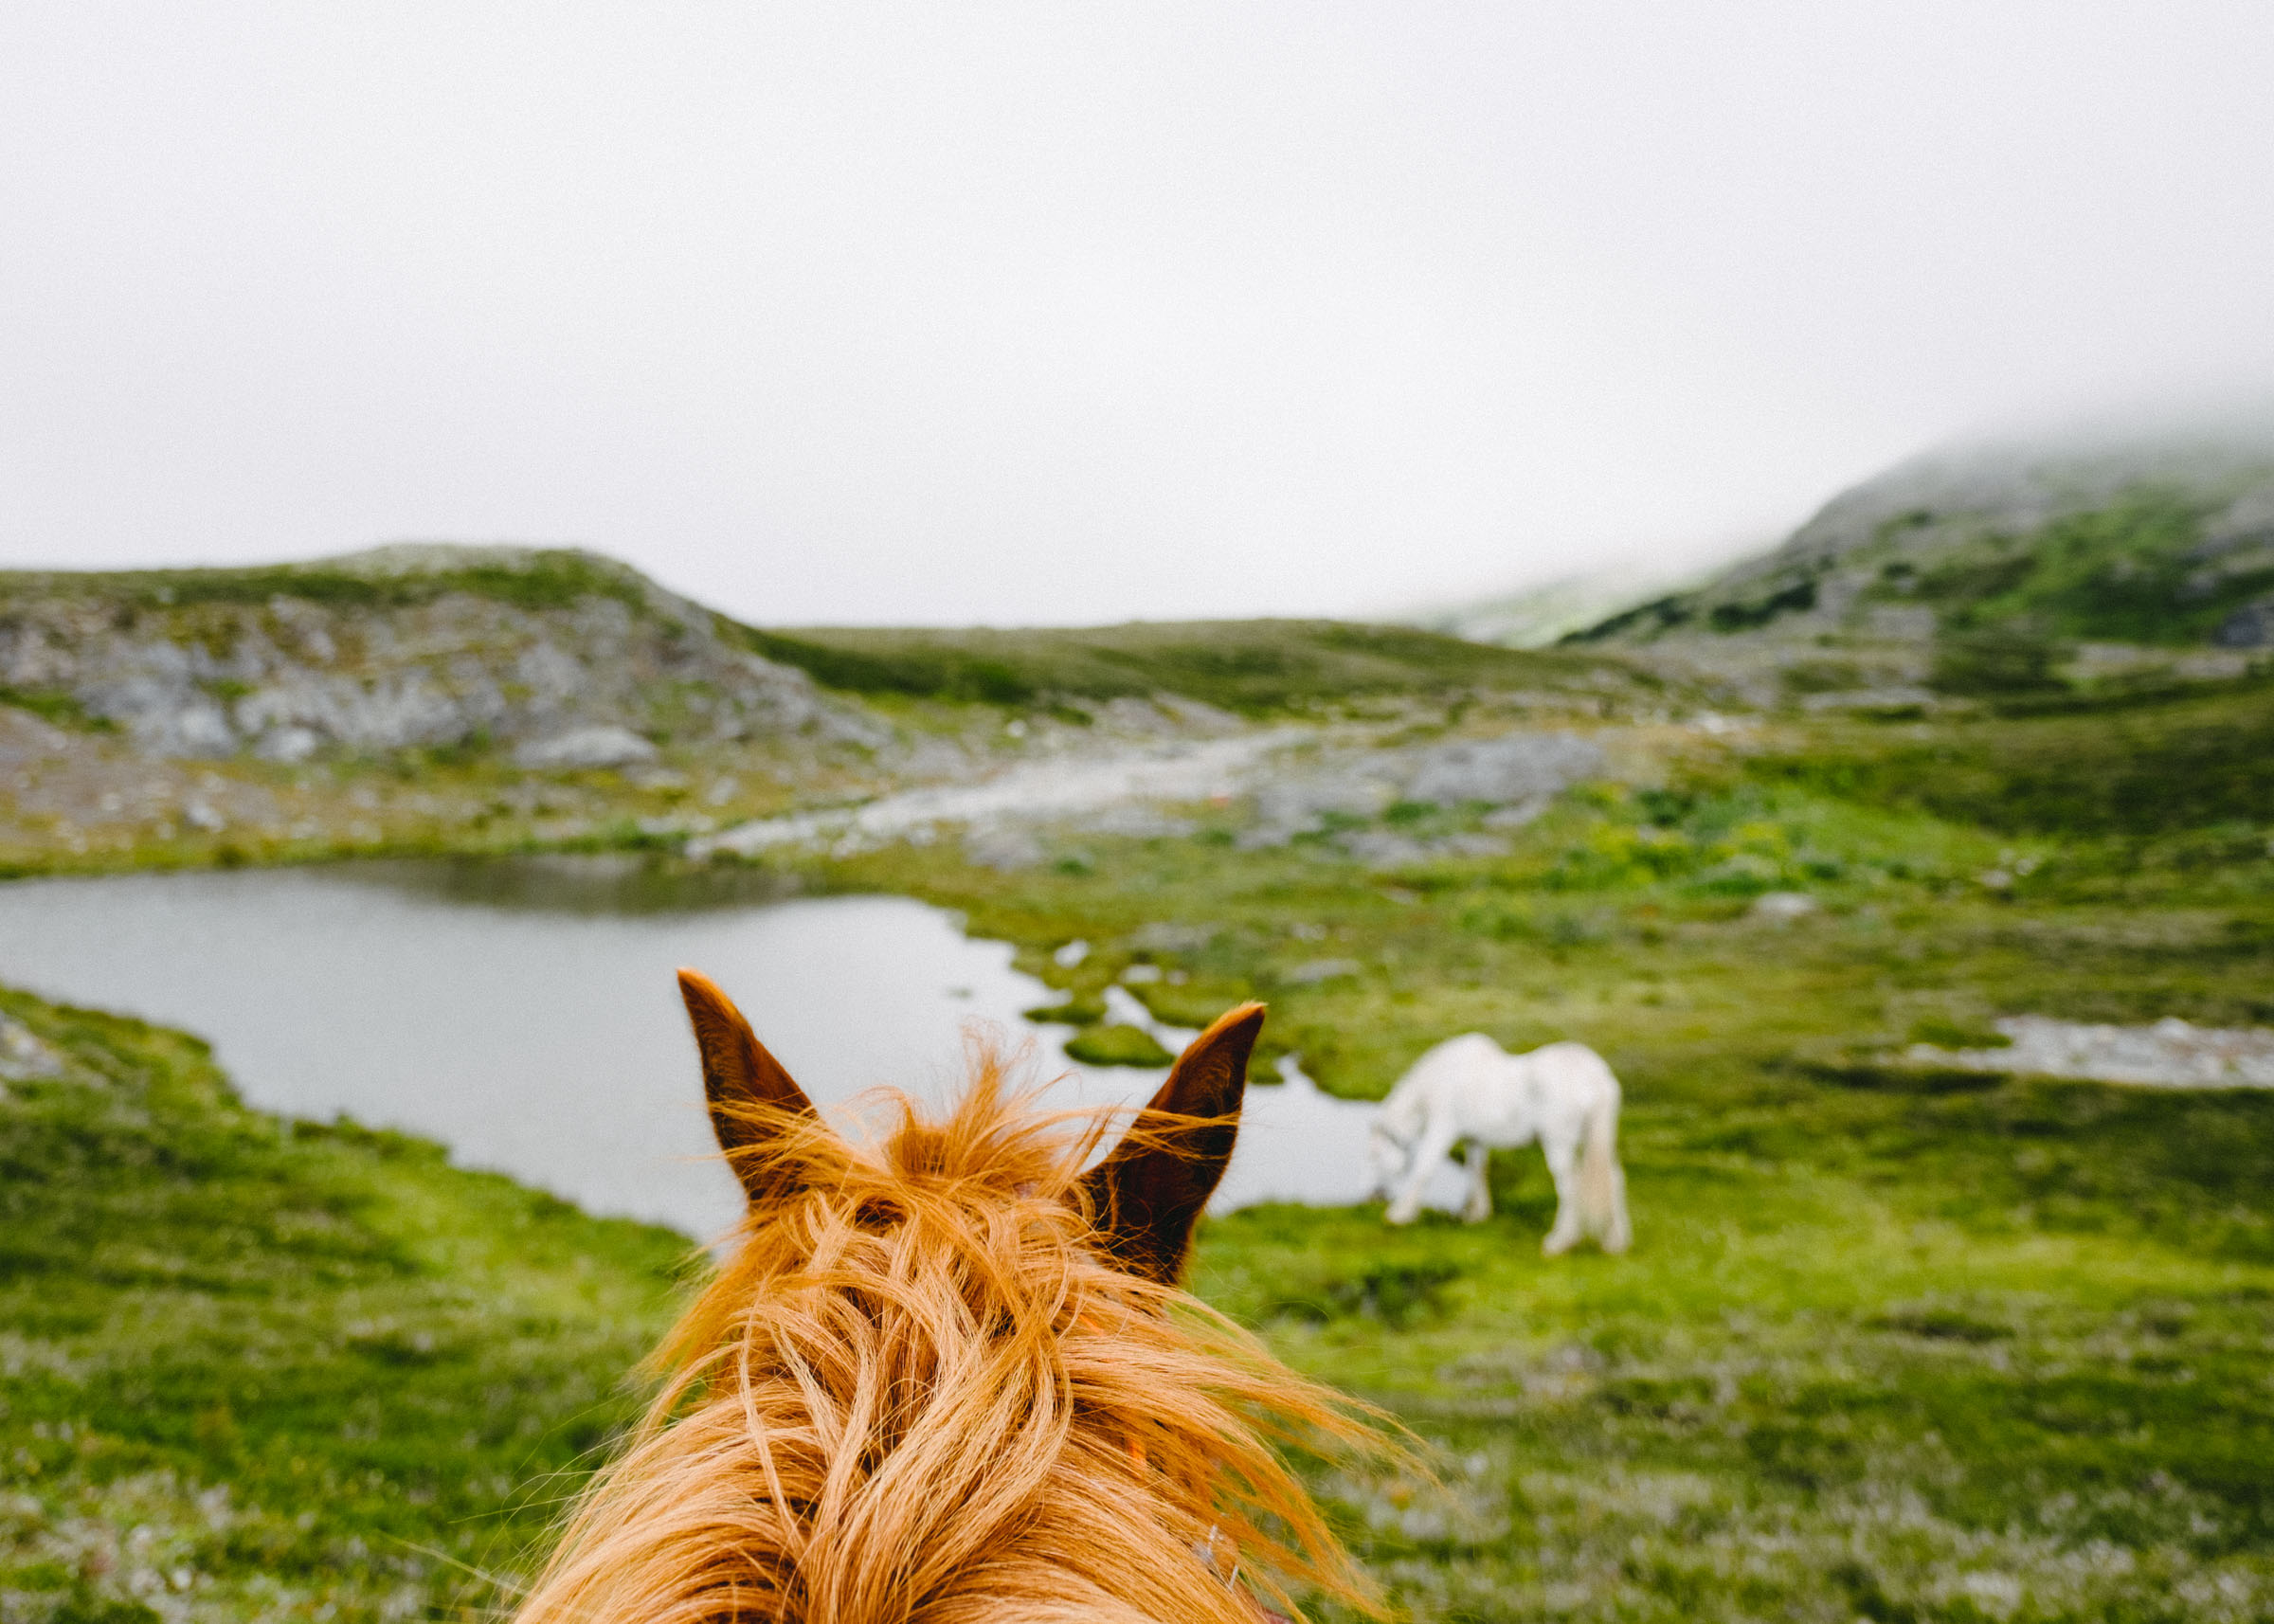 Guided horseback ride in the mountains of Northern British Columbia